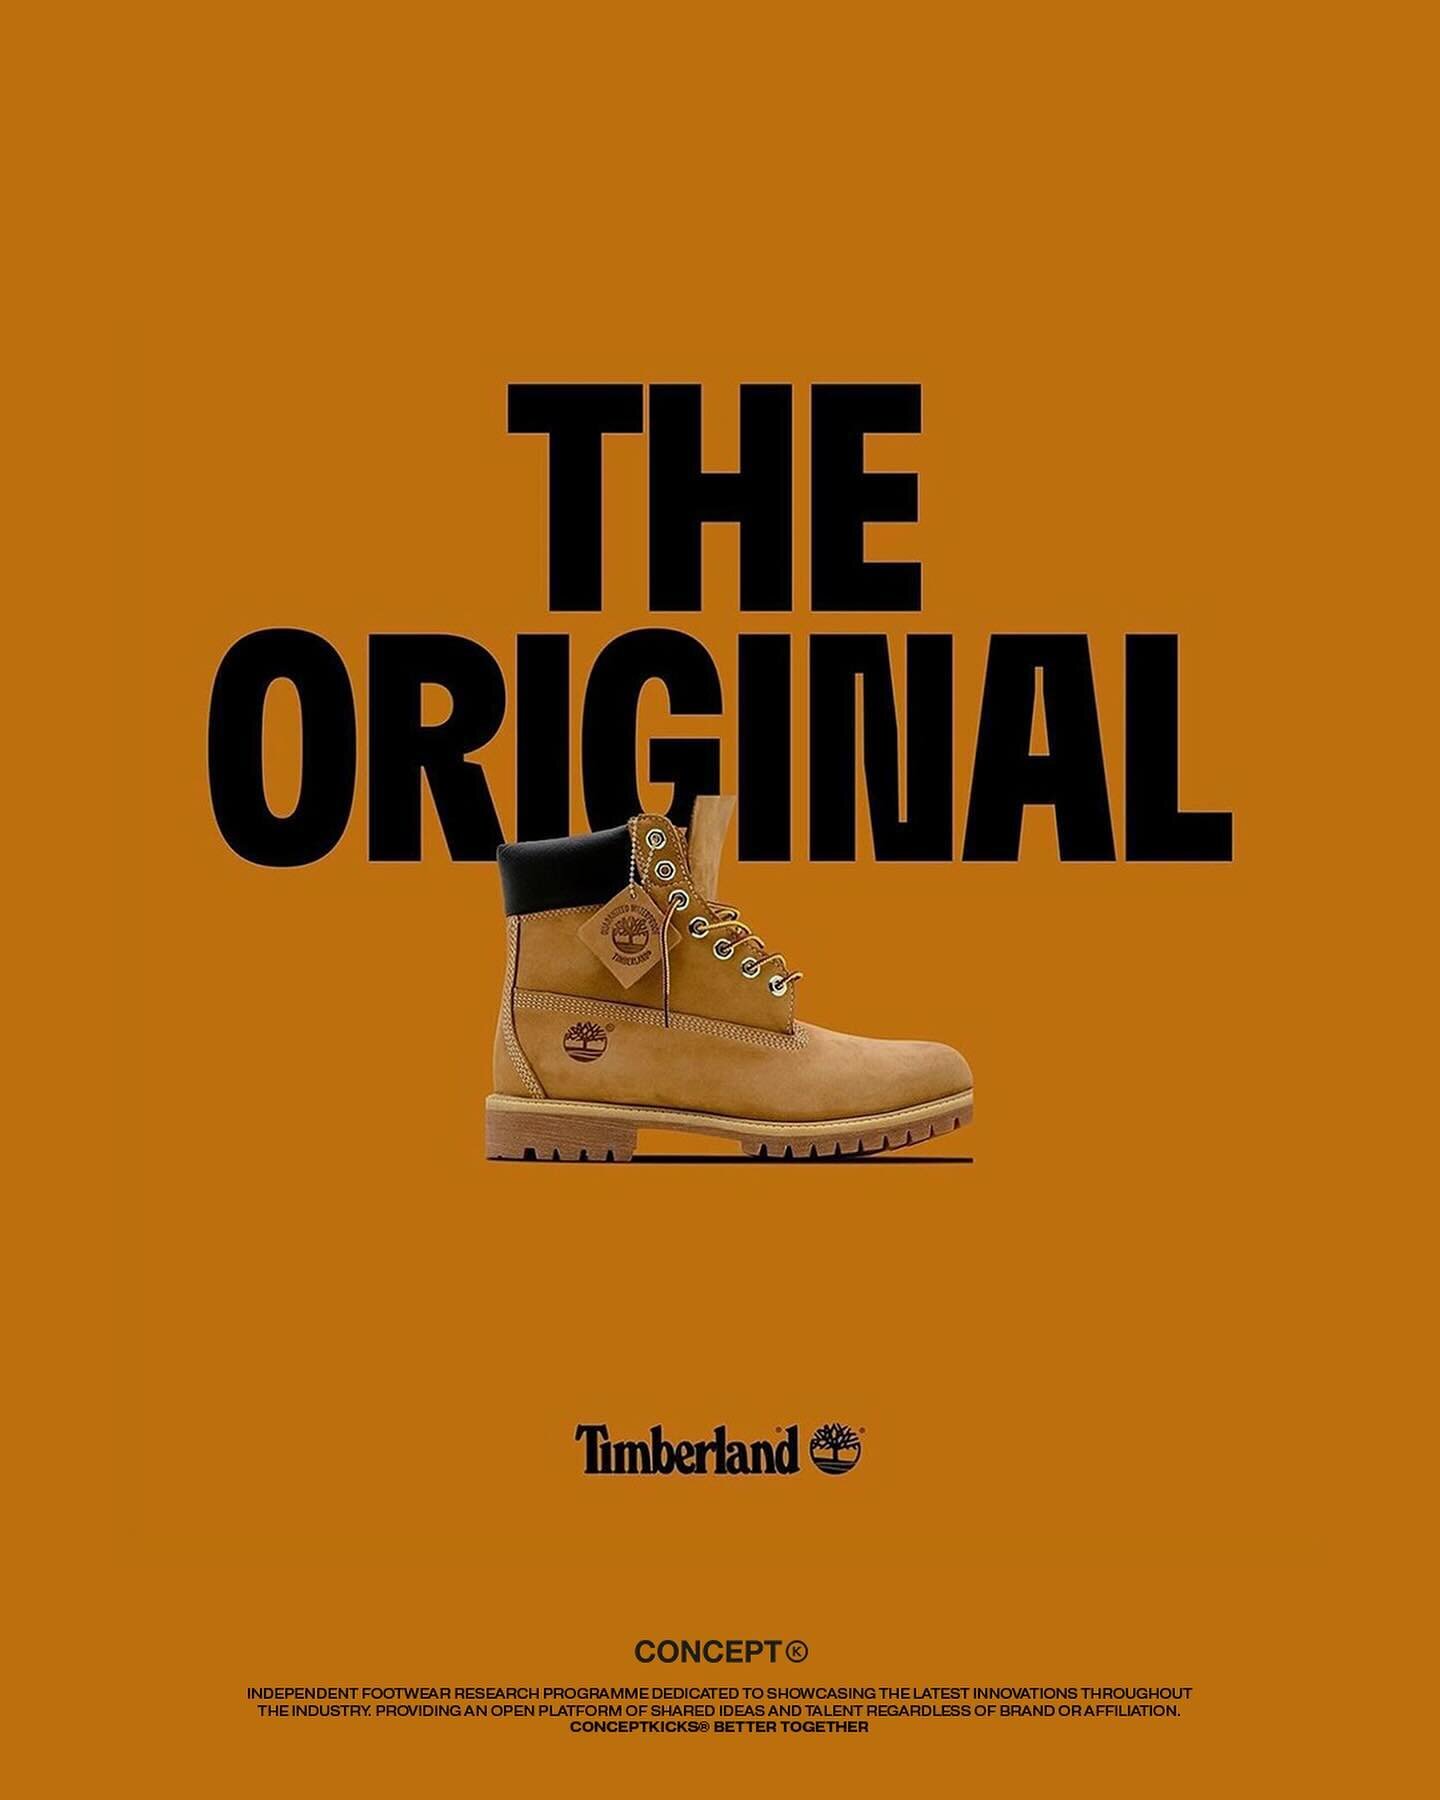 10061 - the serial code for Timberland&rsquo;s most iconic silhouette, the 6-Inch &ldquo;Construct&rdquo; boot, has seen many iterations and homages as of late. From their recent LV collaboration, to MSCHF&rsquo;s creative interpretation of the style